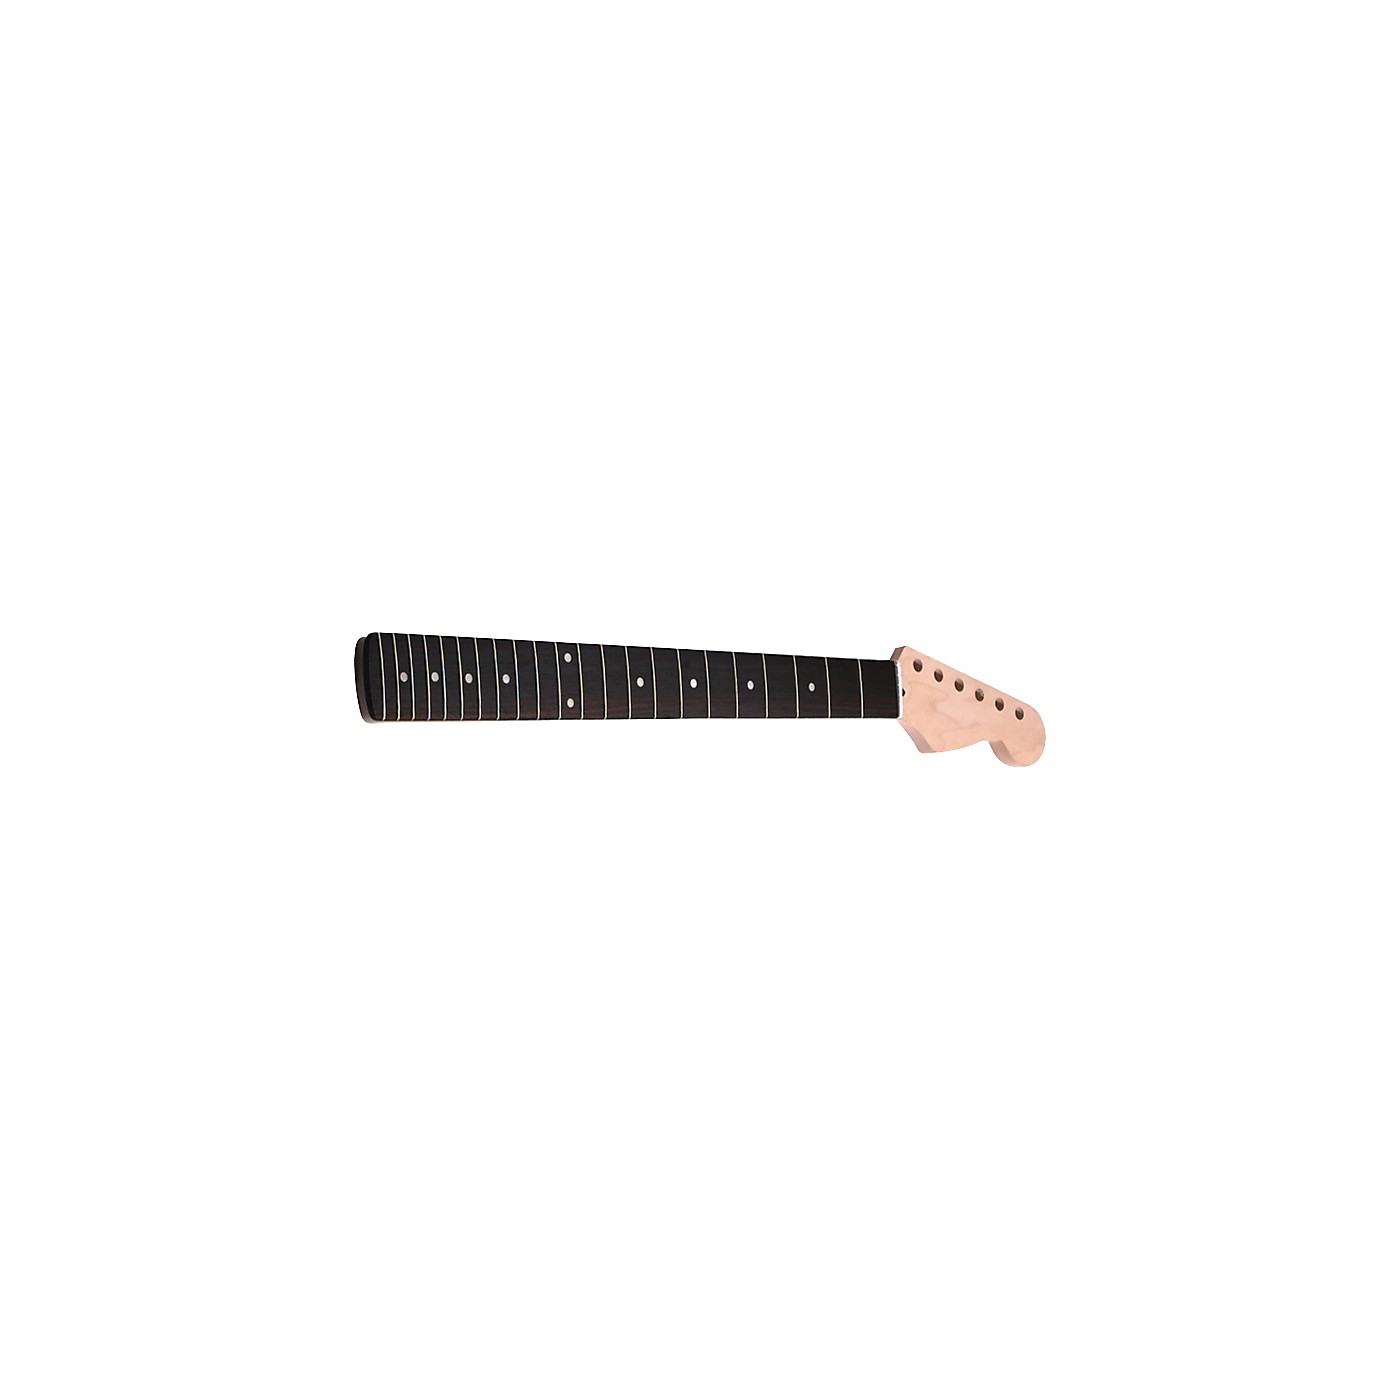 Mighty Mite MM2900 Stratocaster Replacement Neck with Rosewood Fingerboard thumbnail